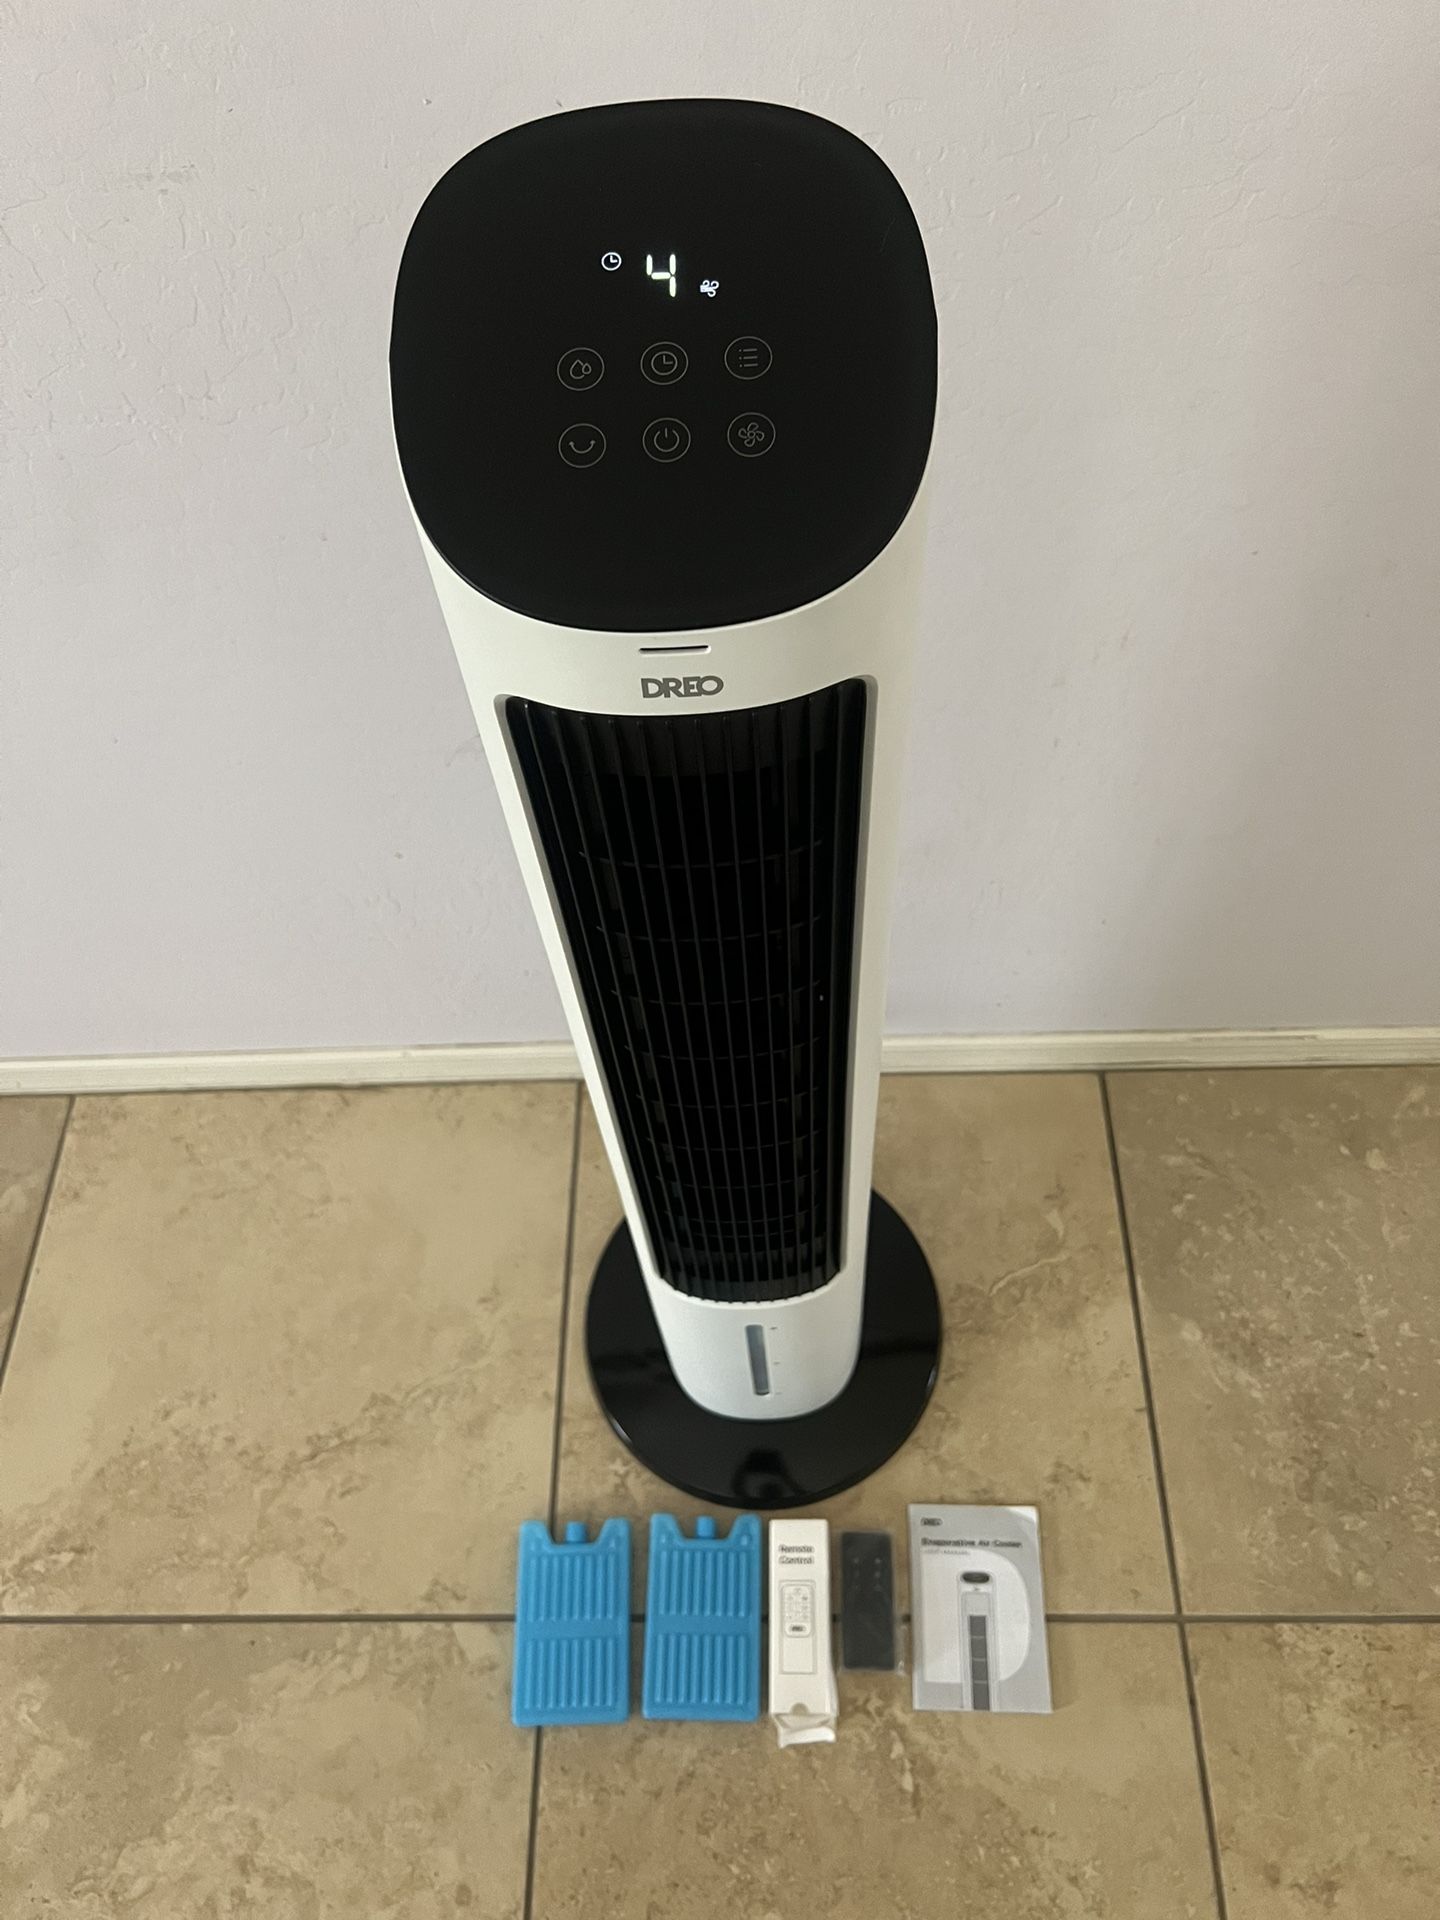 Dreo Tower Fans That Blow Cold Air, 40" Evaporative Air Cooler, Cooling Fan for Bedroom